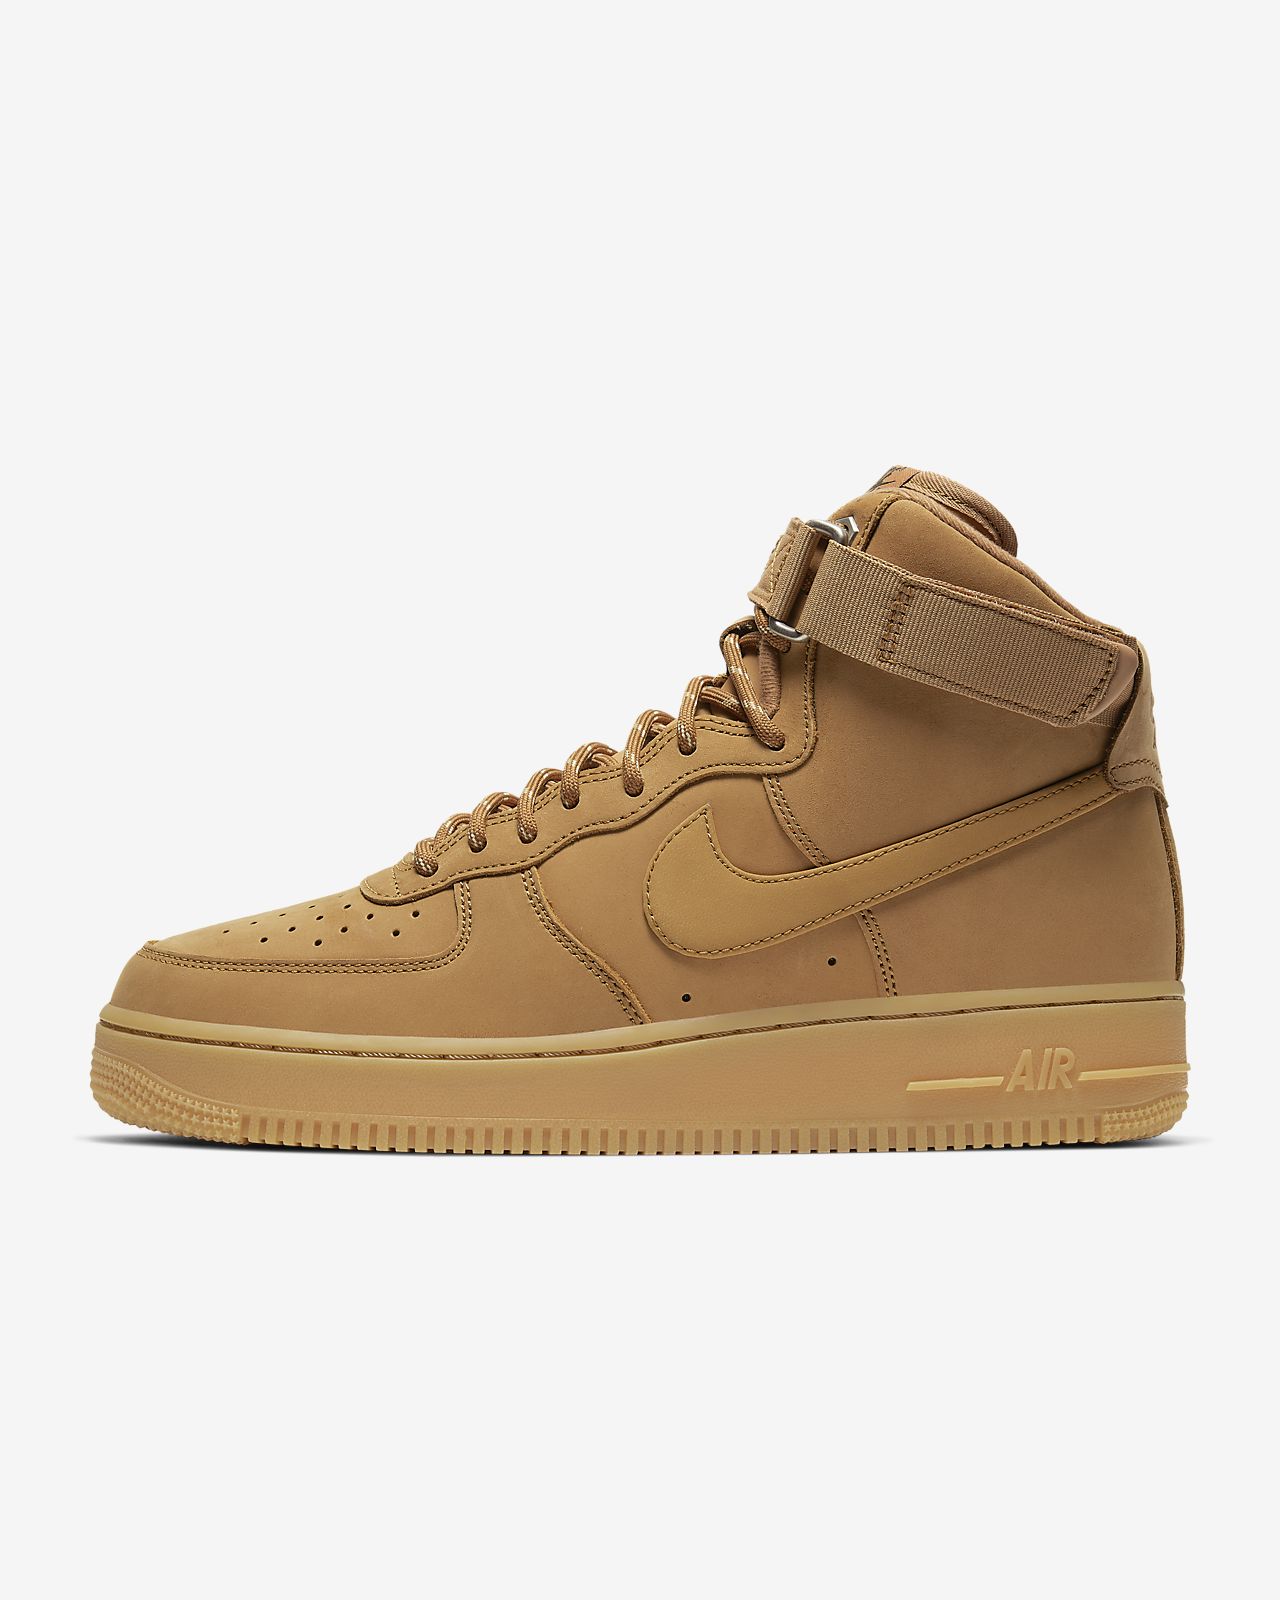 nike air force one high Shop Clothing 